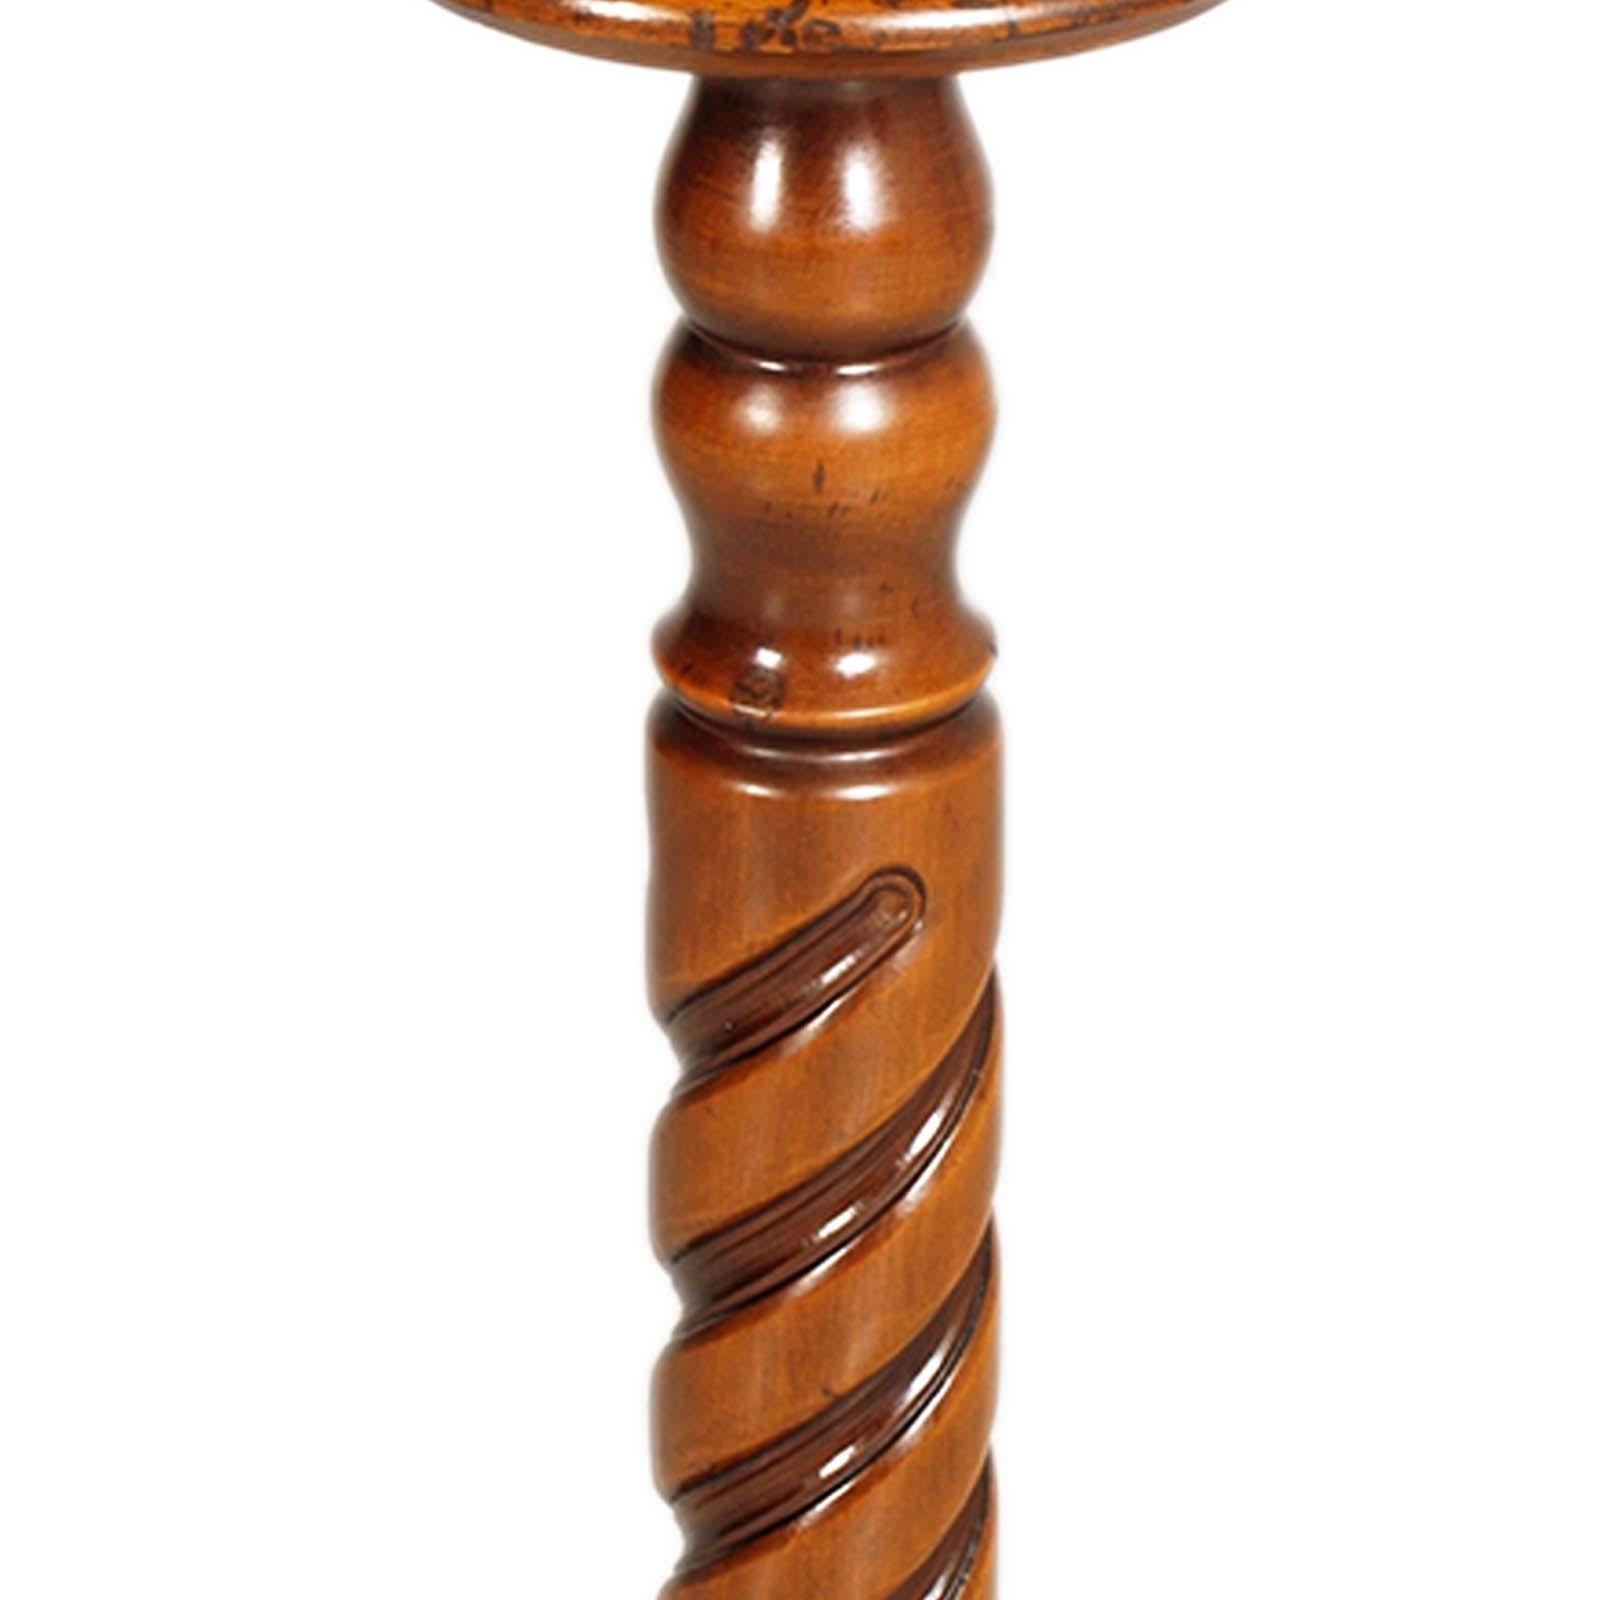 Twisted walnut column for vase, bust holder or sculpture, 1940s, Gothic style, wax polished, with exceptional patina. Circular base and turned top.


About Bassano's Ebanisteria
The Bassano del Grappa area, up to the hills of Asolo and the plain